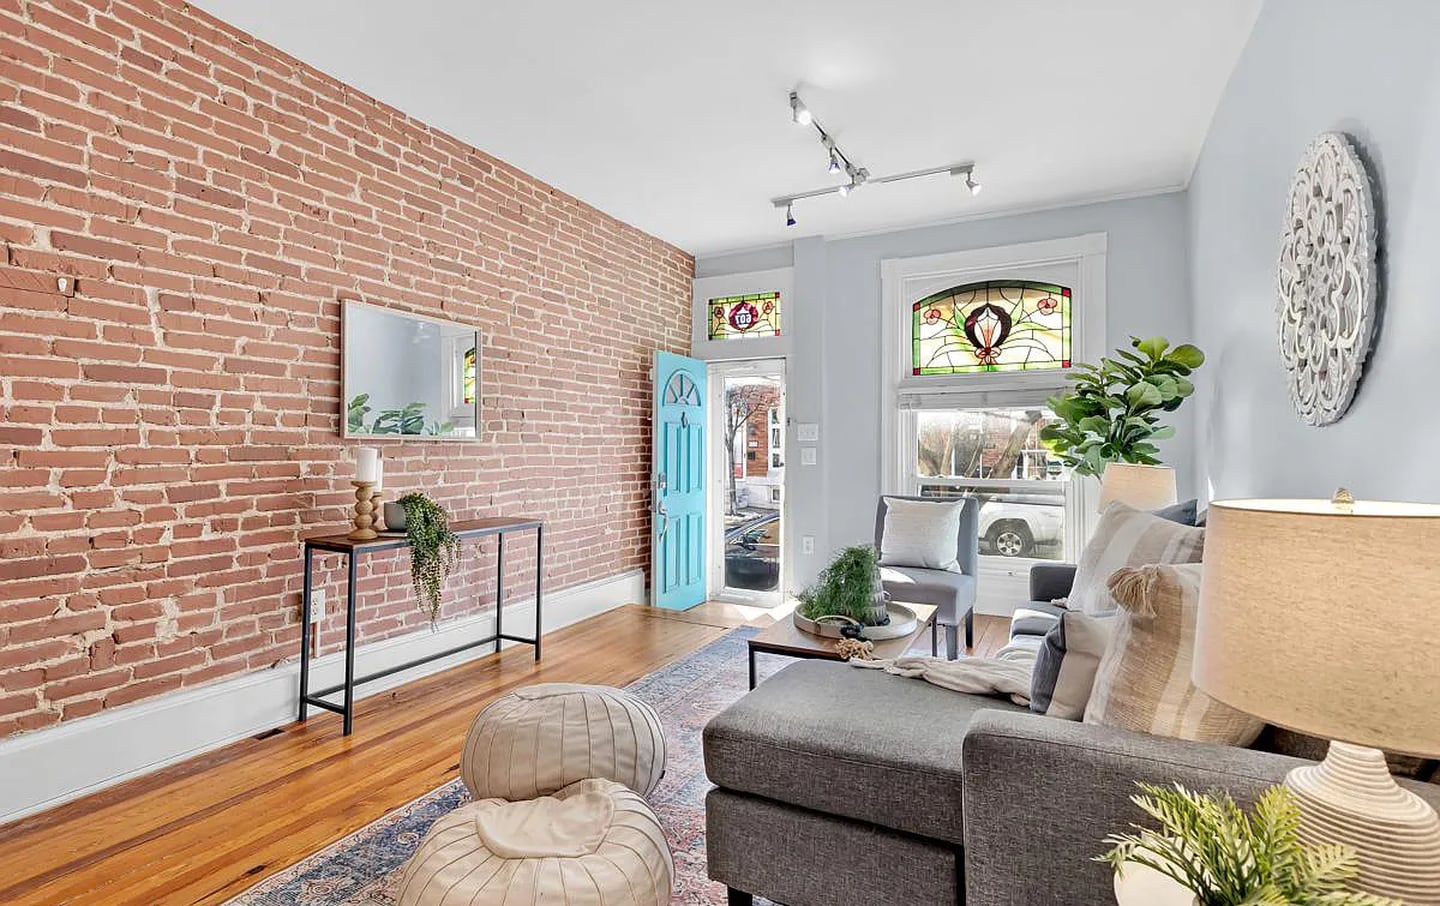 A front room with an exposed brick wall, white trim, blonde hardwood floors, a stained glass transom and window.